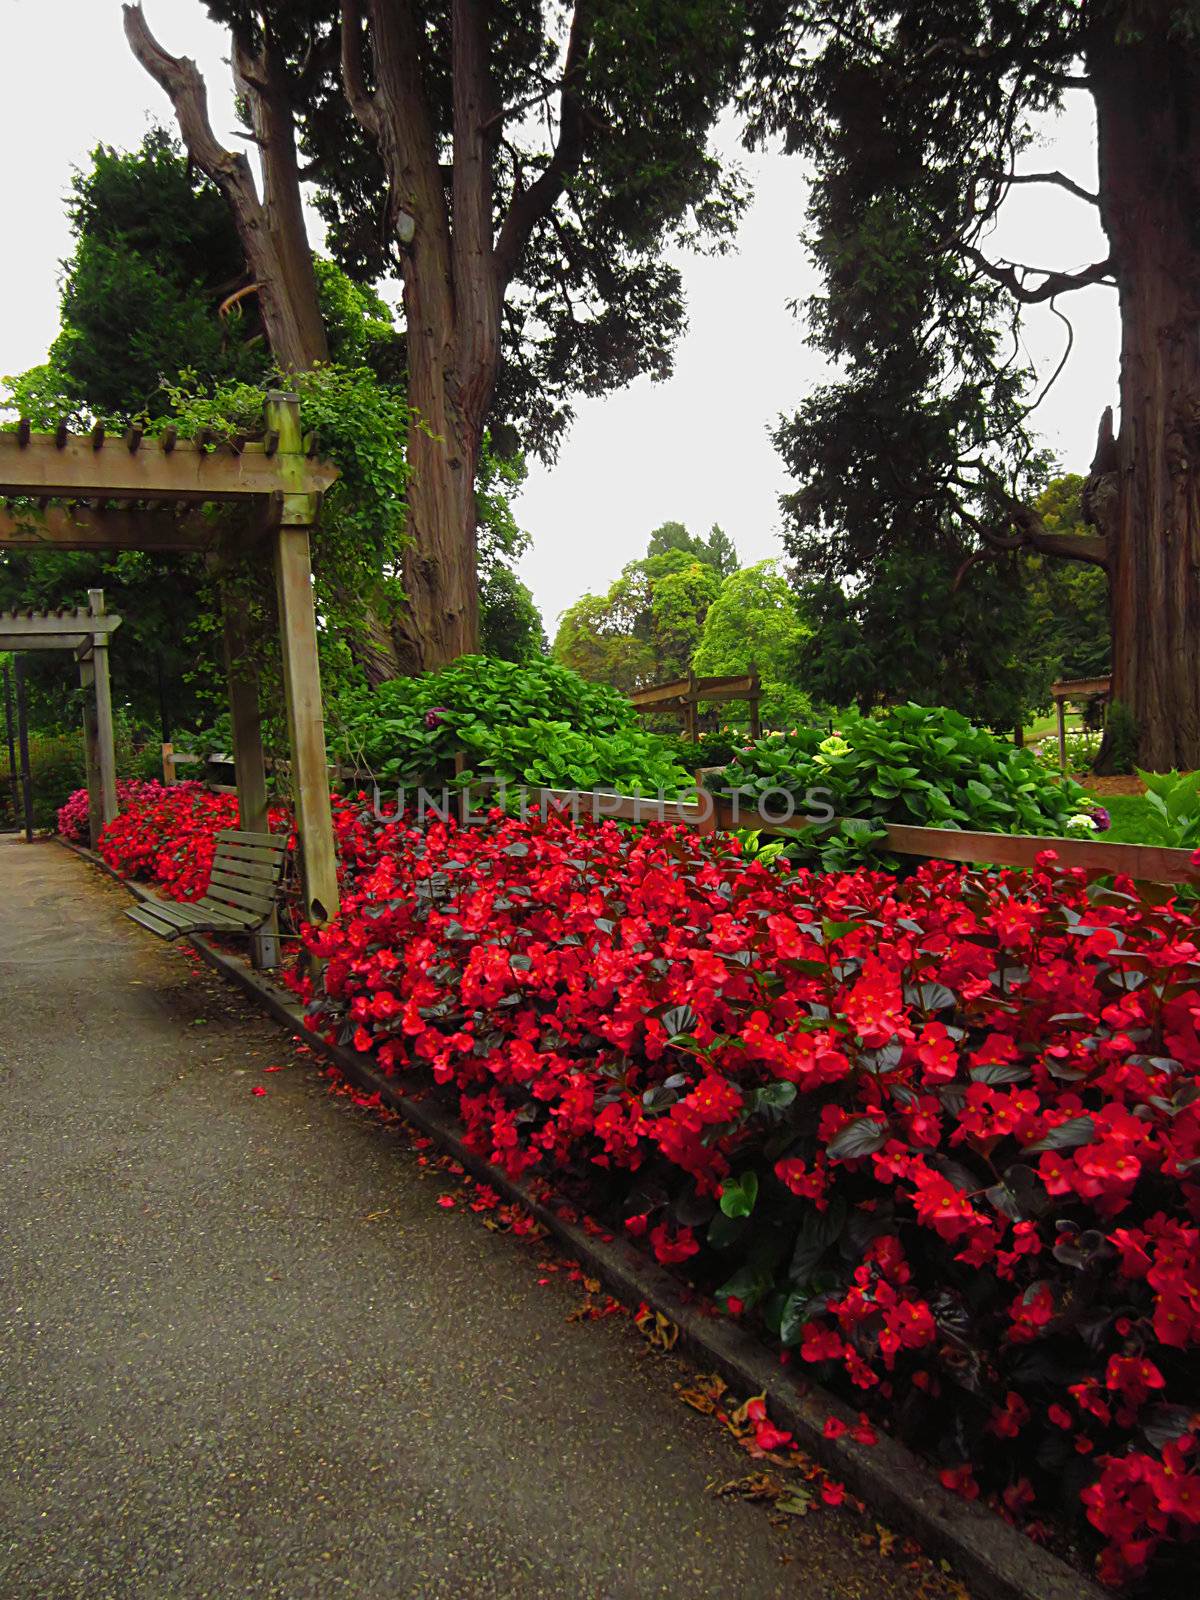 A photograph of a flower garden located at a public park.